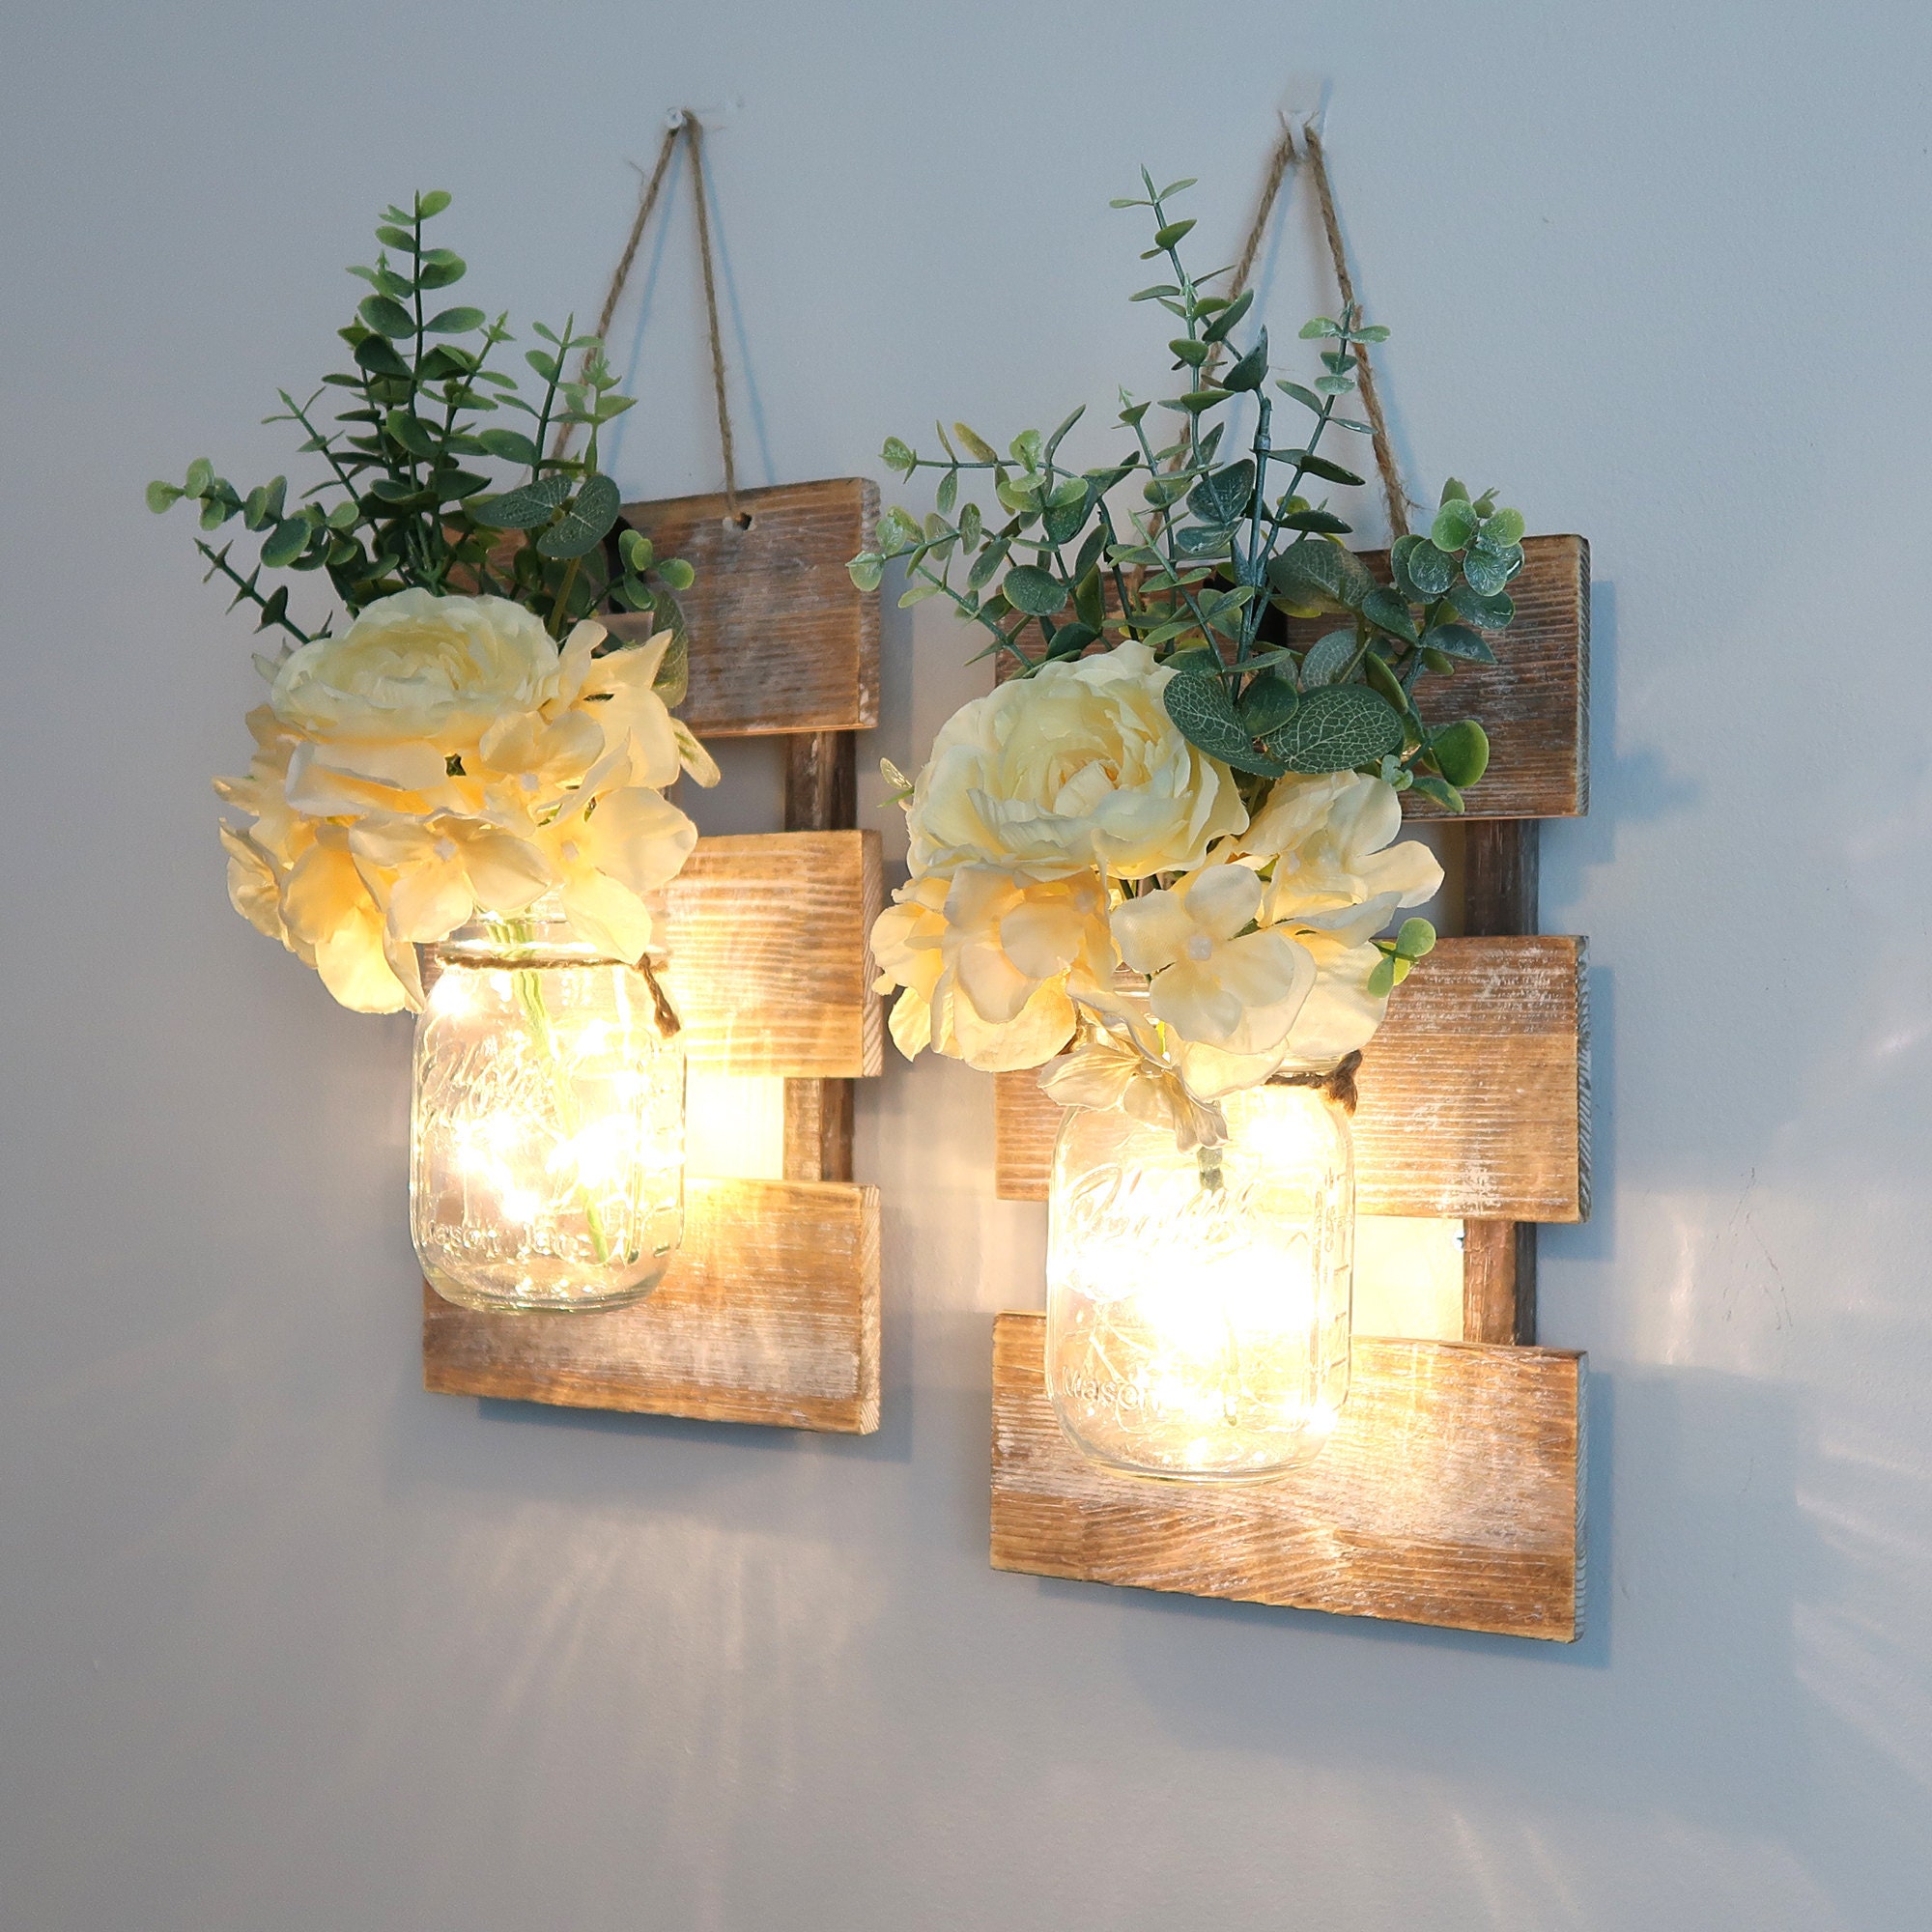 2 Pack Mason Jar Wall Decor With 8 Functions Remote Rustic Wood Farmhous Wall Sconce With White Silk Hydrangea for Home Hanging Mason Jars Light with 6-Hour Timer 30 Led Fairy Lights